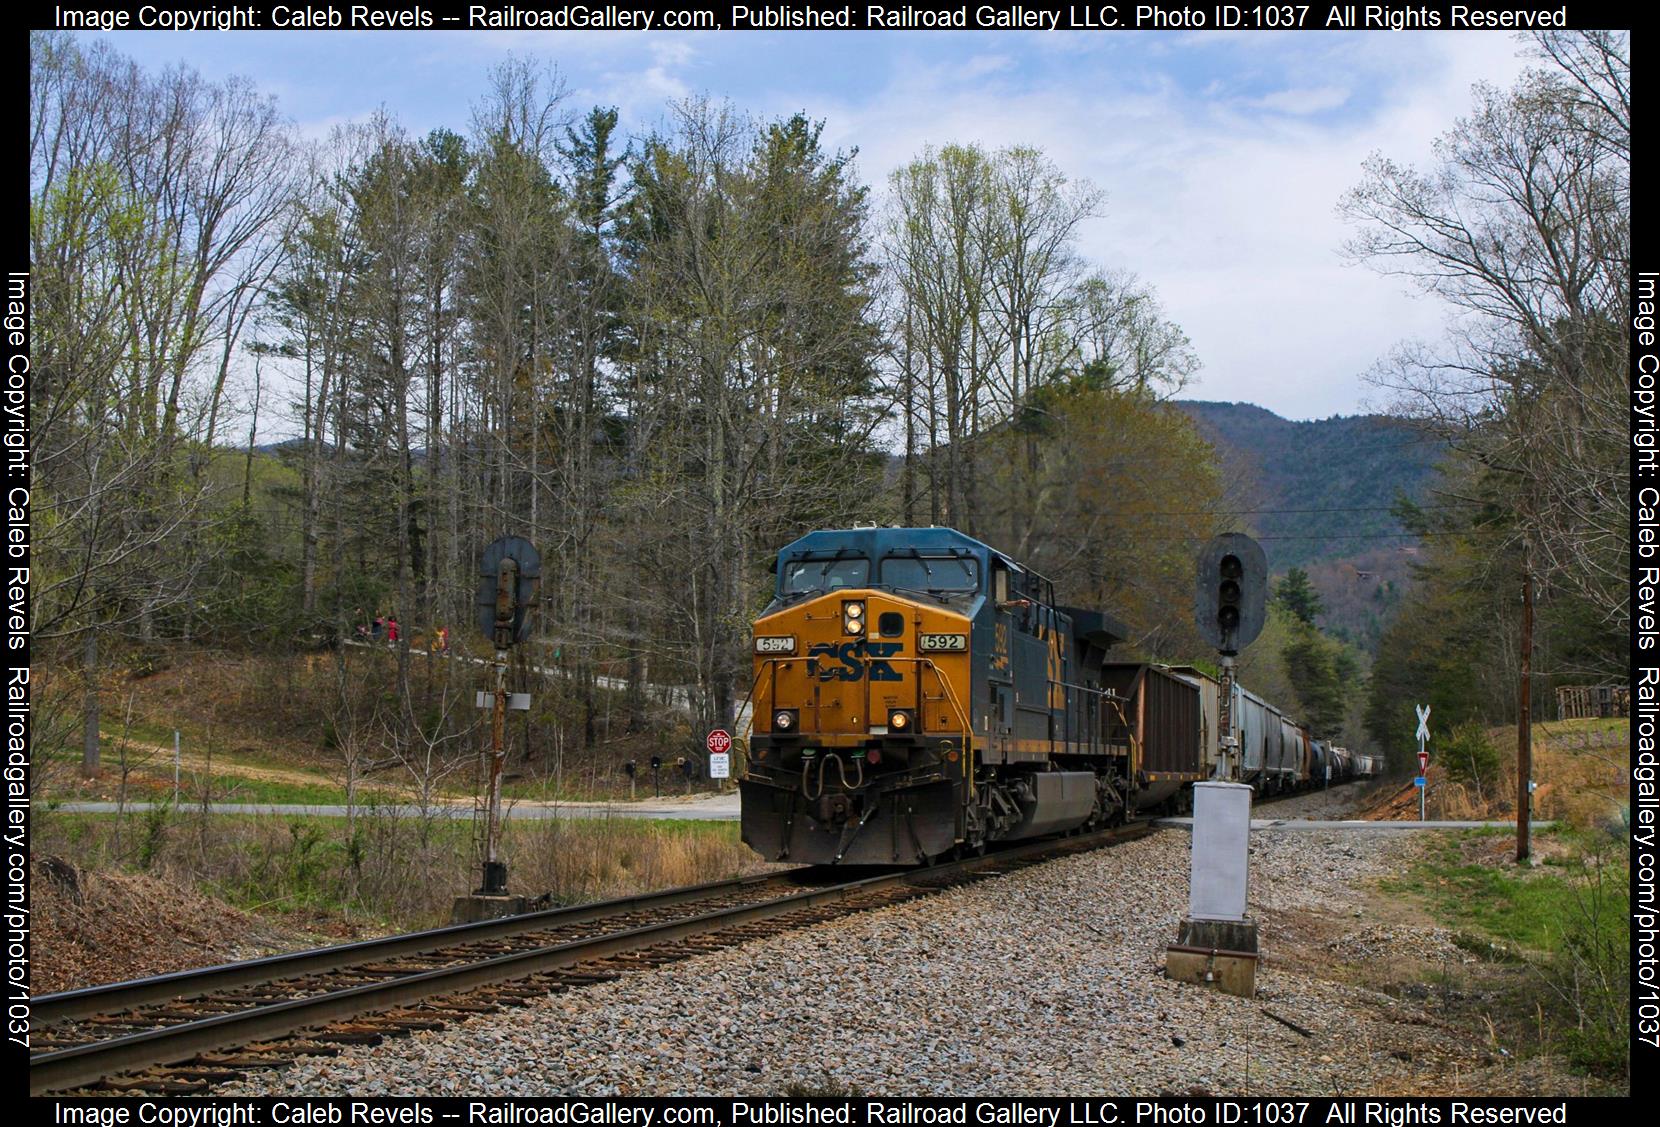 CSXT 592 is a class GE AC4400CW and  is pictured in Ashford, North Carolina, USA.  This was taken along the CSX Blue Ridge Subdivision  on the CSX Transportation. Photo Copyright: Caleb Revels uploaded to Railroad Gallery on 05/05/2023. This photograph of CSXT 592 was taken on Monday, April 03, 2023. All Rights Reserved. 